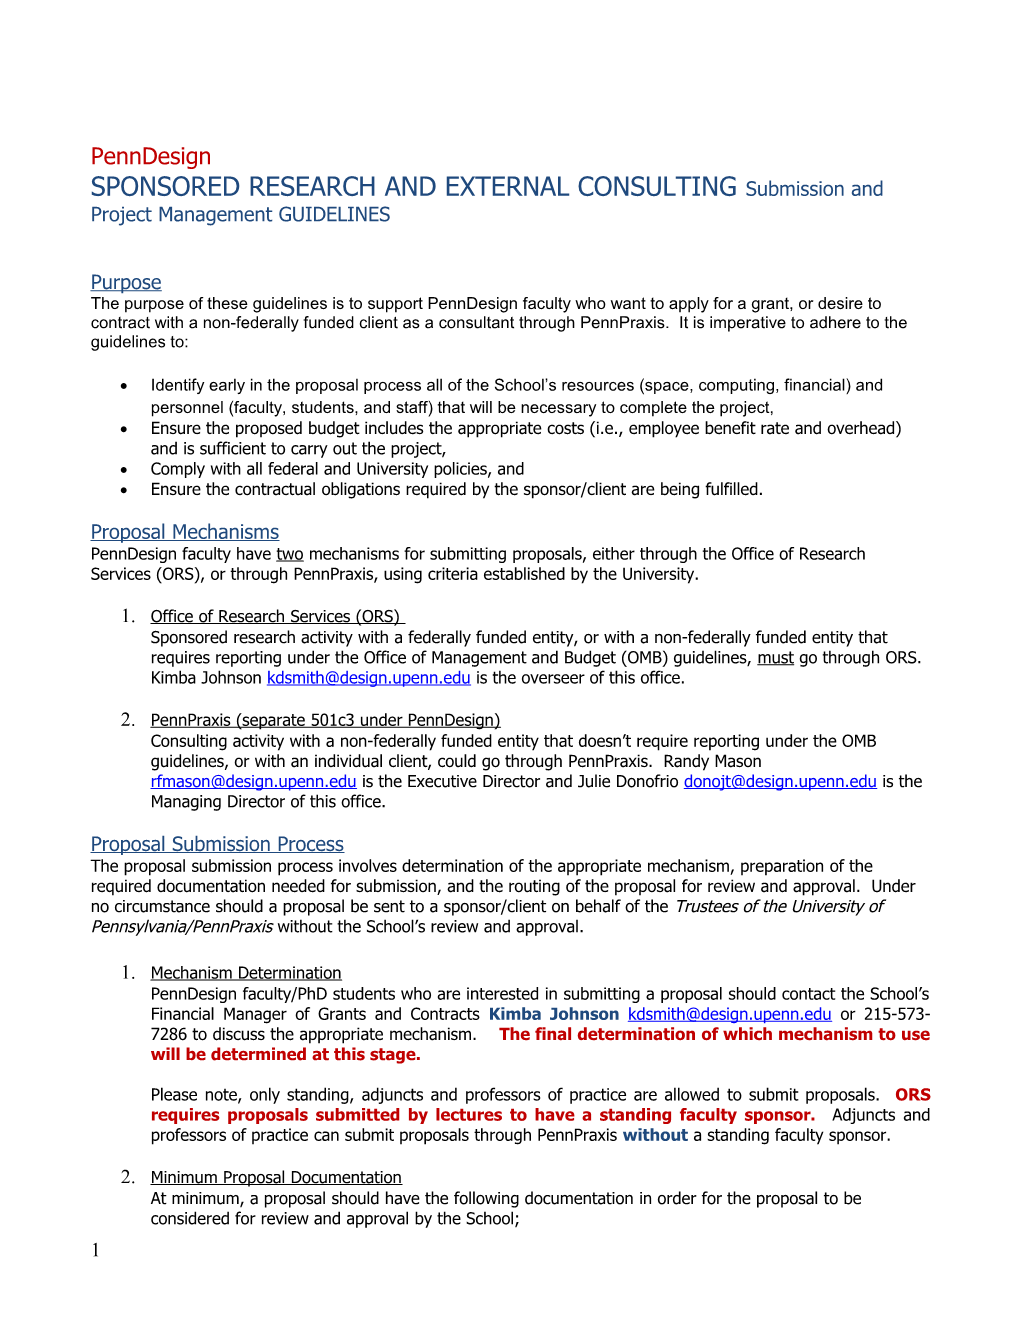 SPONSORED RESEARCH and EXTERNAL CONSULTING Submission and Project Management GUIDELINES